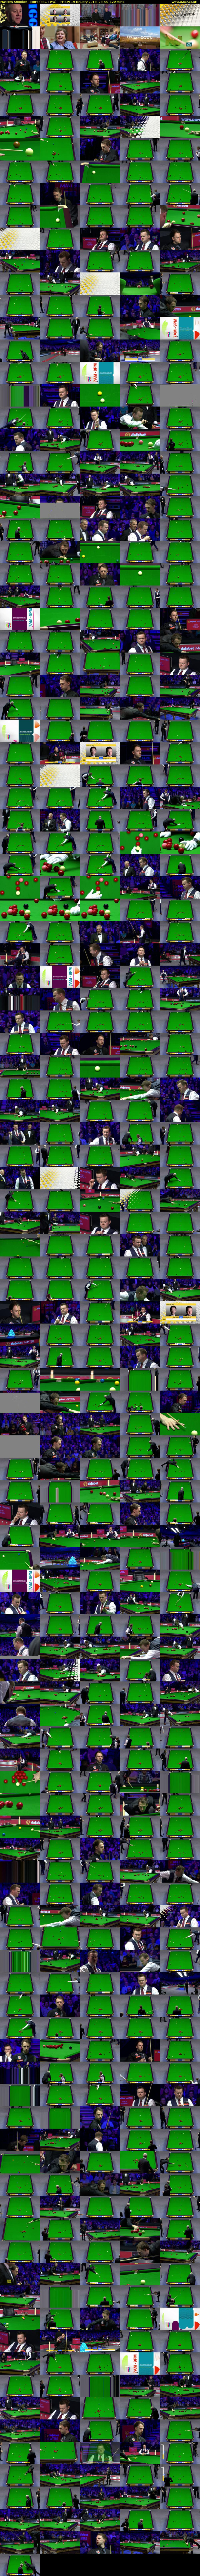 Masters Snooker - Extra (BBC TWO) Friday 19 January 2018 23:55 - 01:55